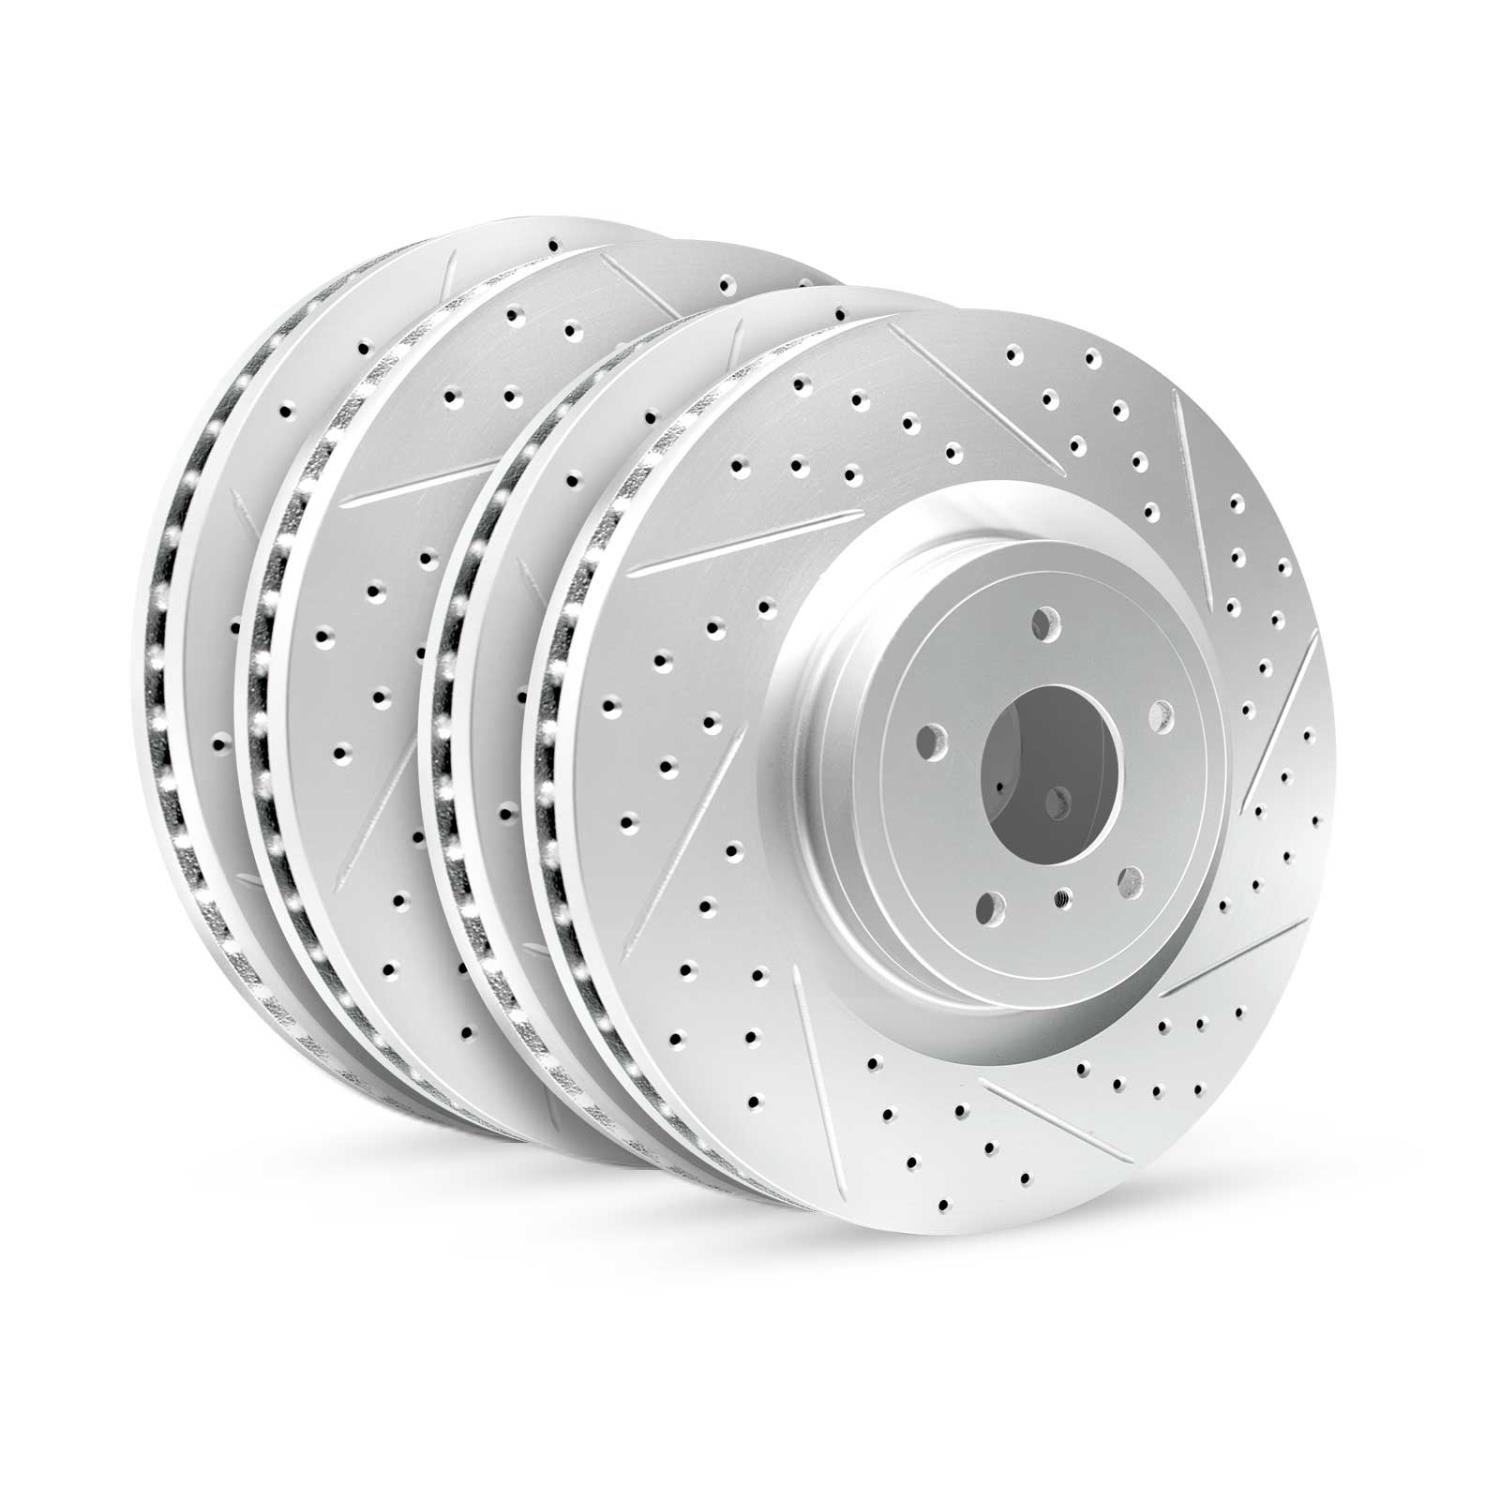 GEO-Carbon Drilled/Slotted Rotors, 1990-1999 Subaru, Position: Front/Rear